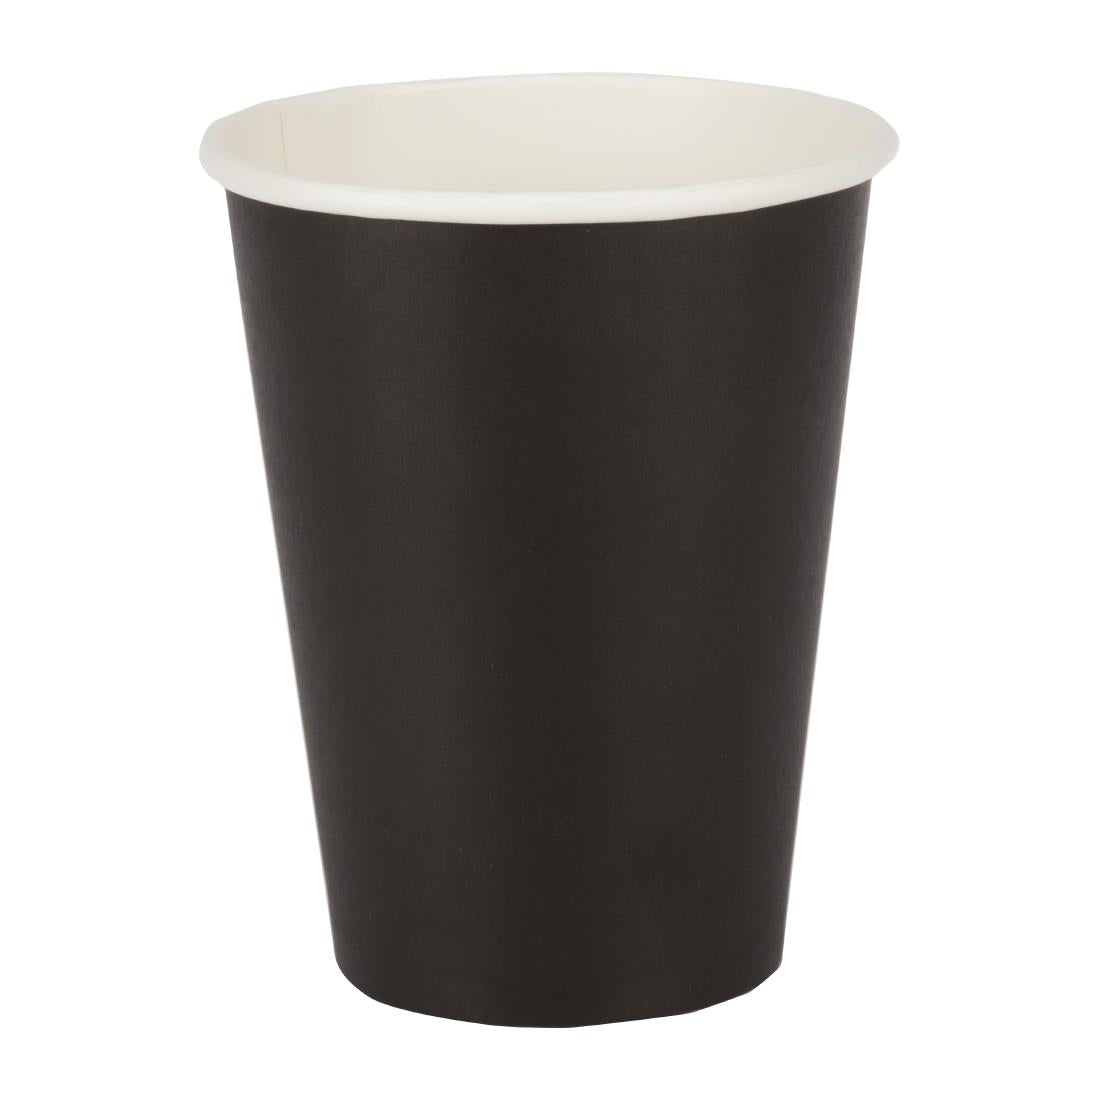 GF042 Fiesta Recyclable Coffee Cups Single Wall Black 340ml / 12oz (Pack of 1000) JD Catering Equipment Solutions Ltd